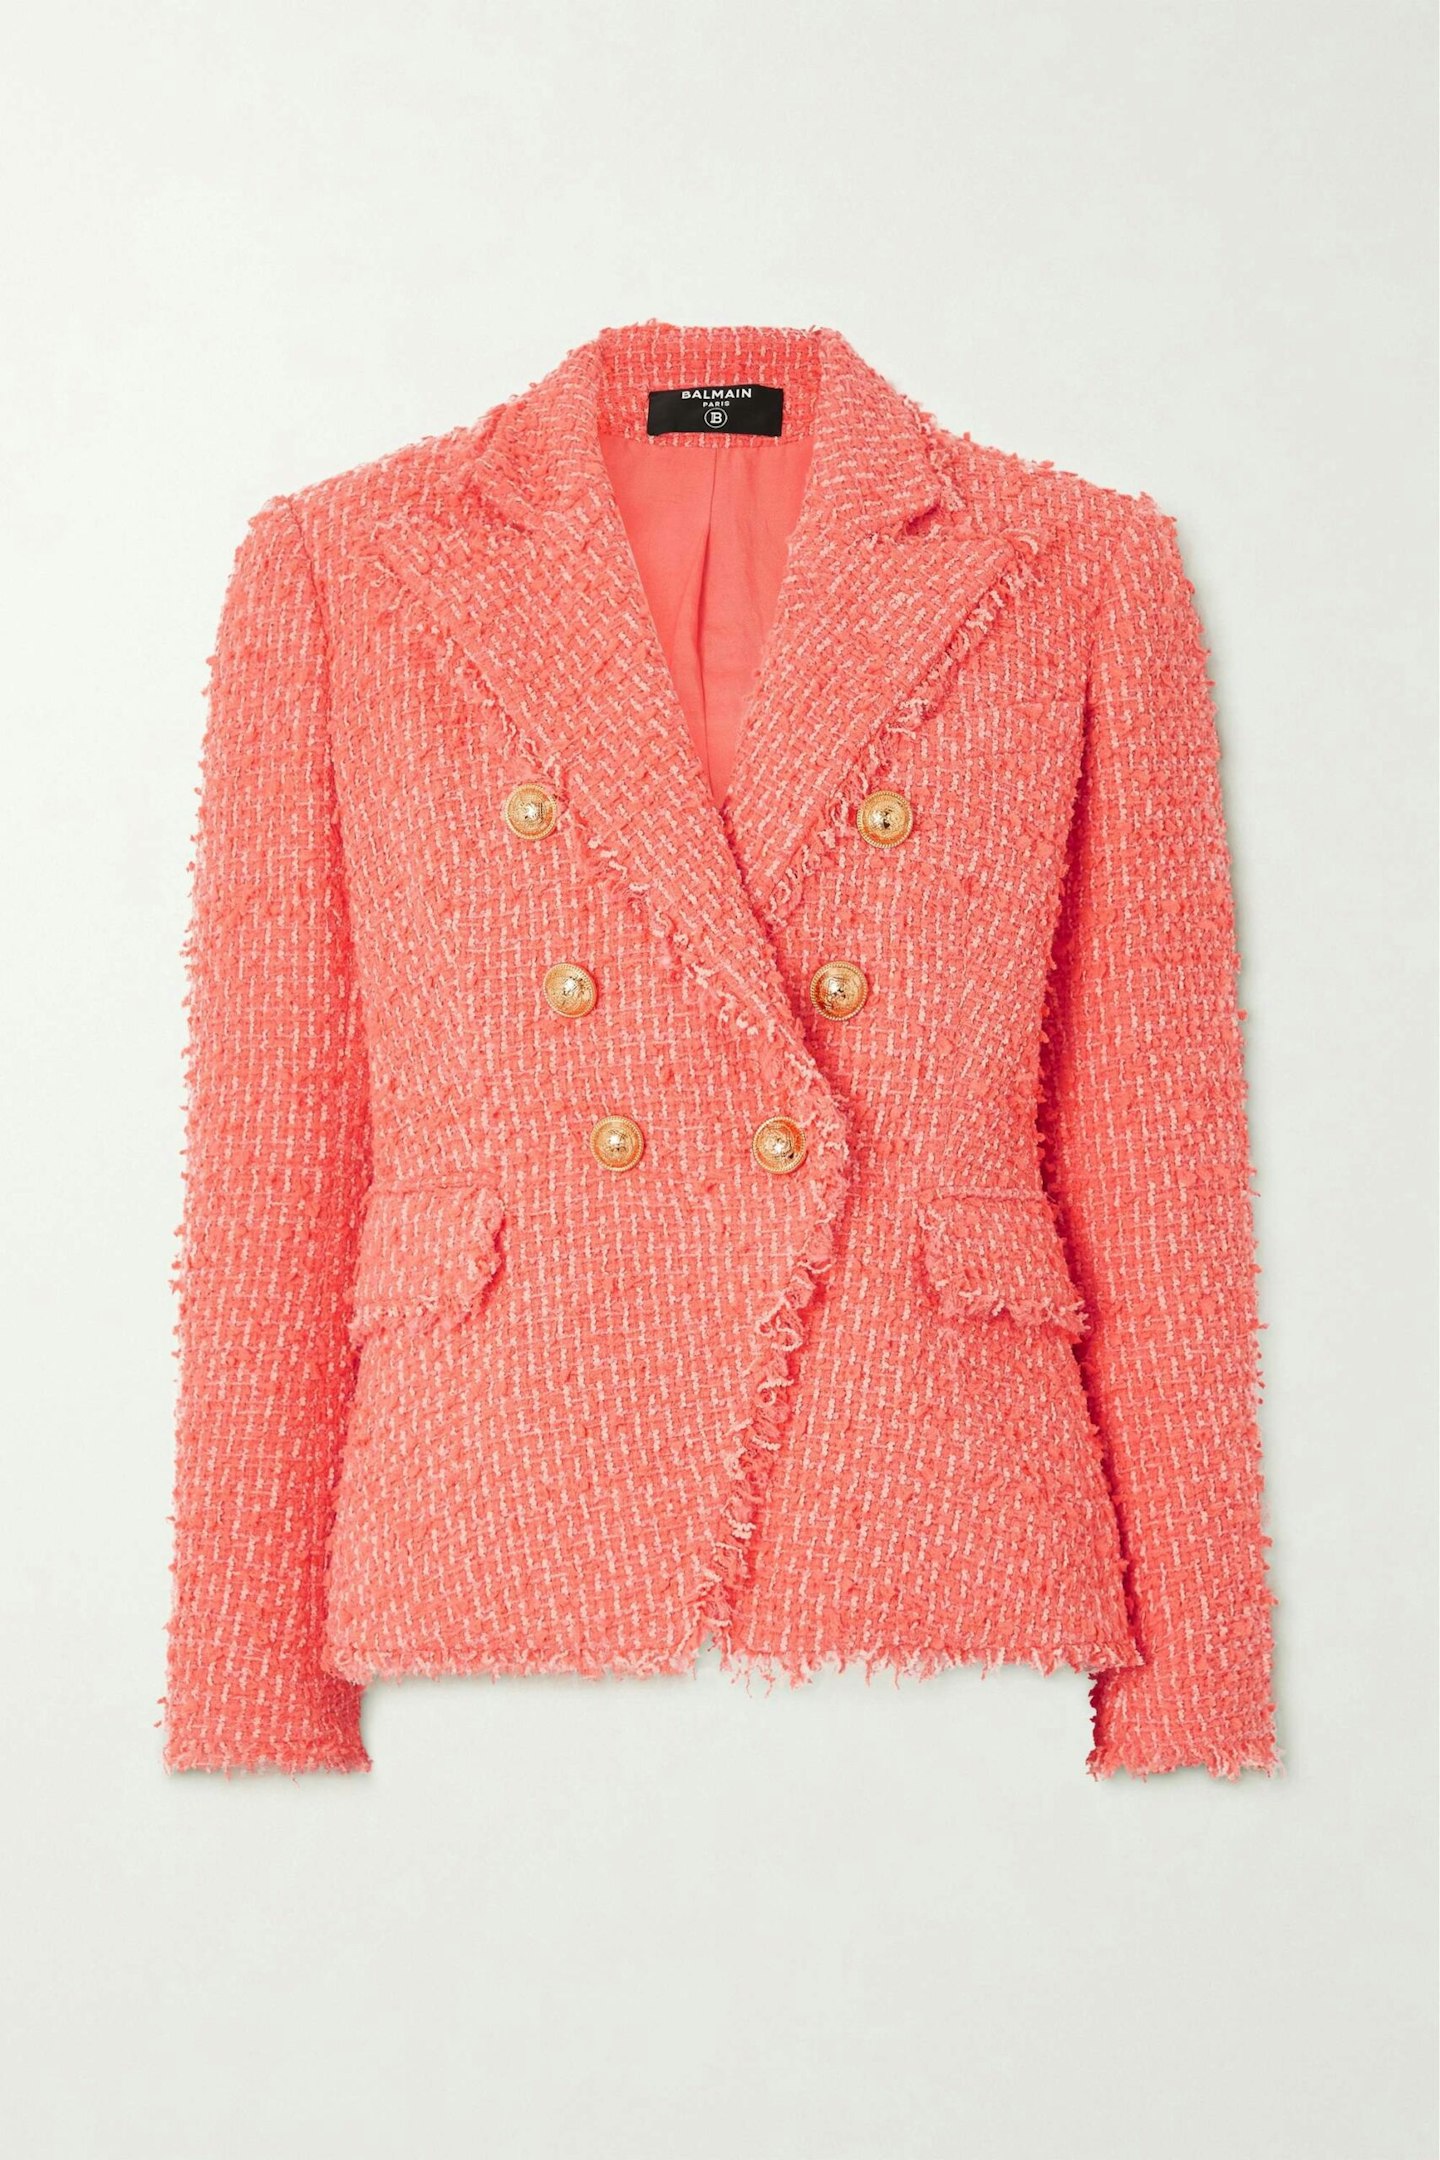 Balmain, Button-Embellished Double-Breasted Blazer